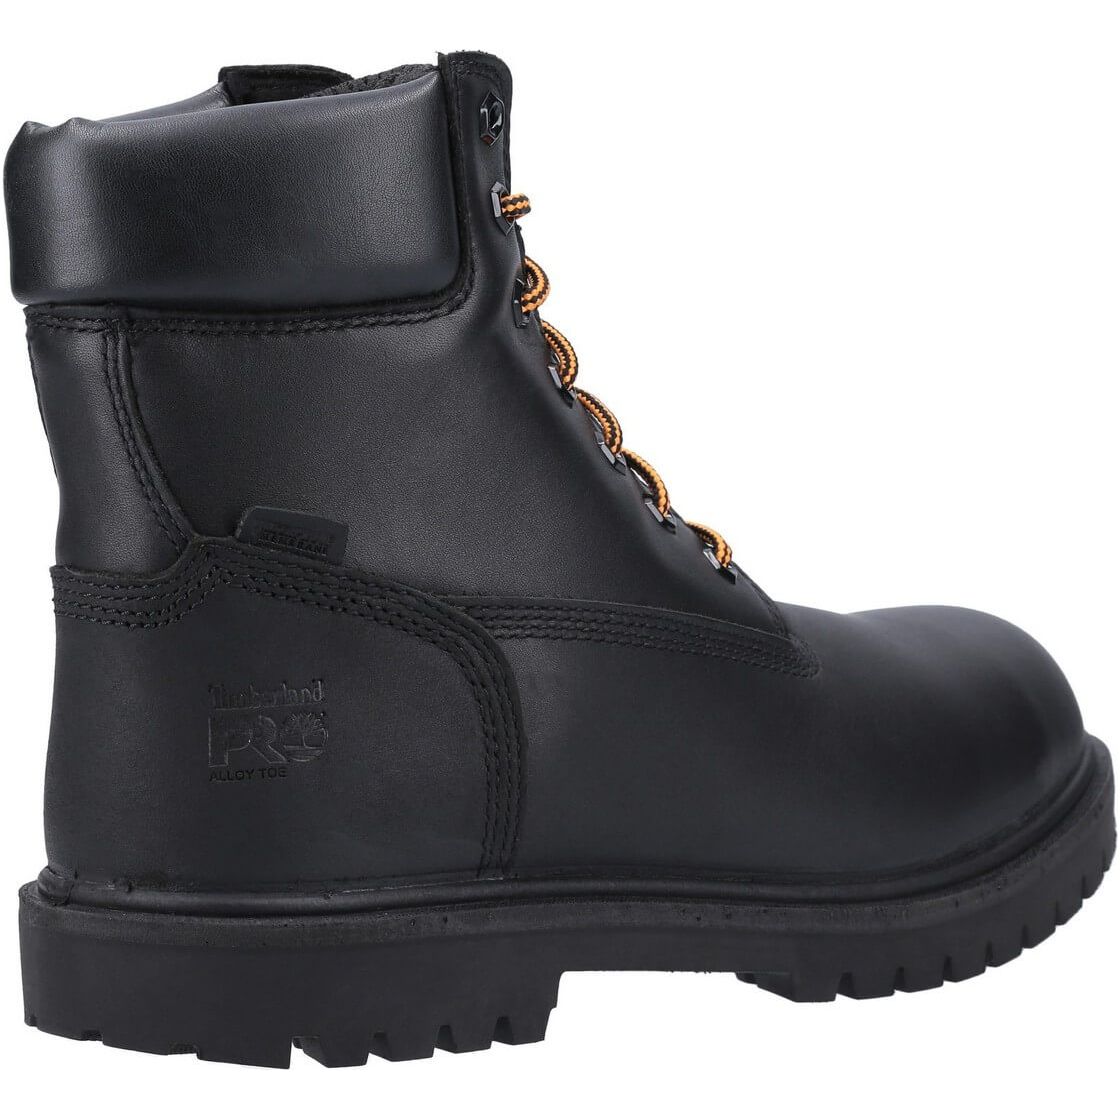 Timberland Iconic Toe Cap Safety Boots - Mens - Sale